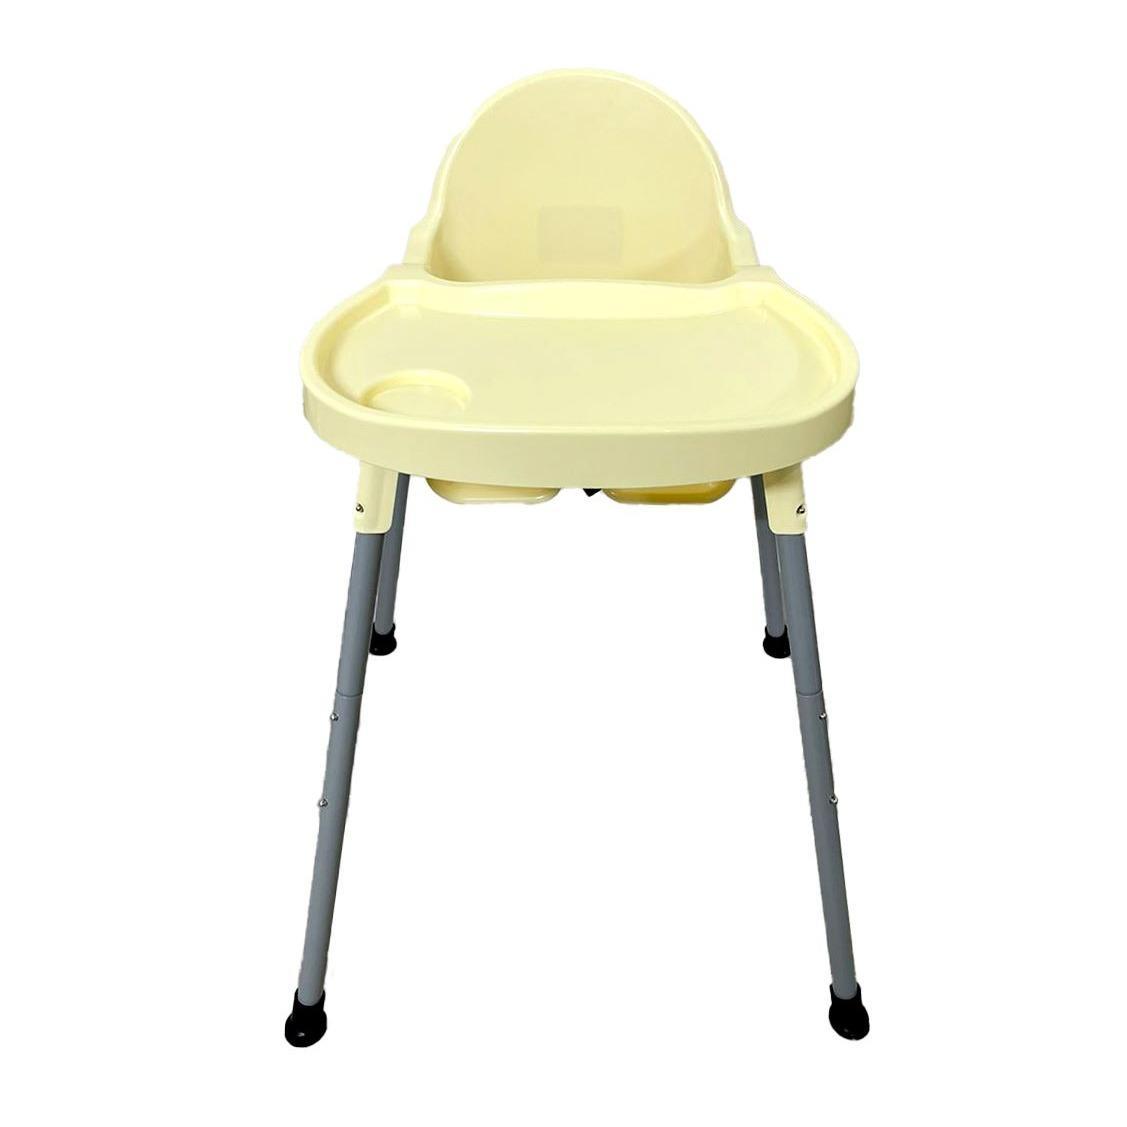 Plastic Baby Chair With Cover | Beige